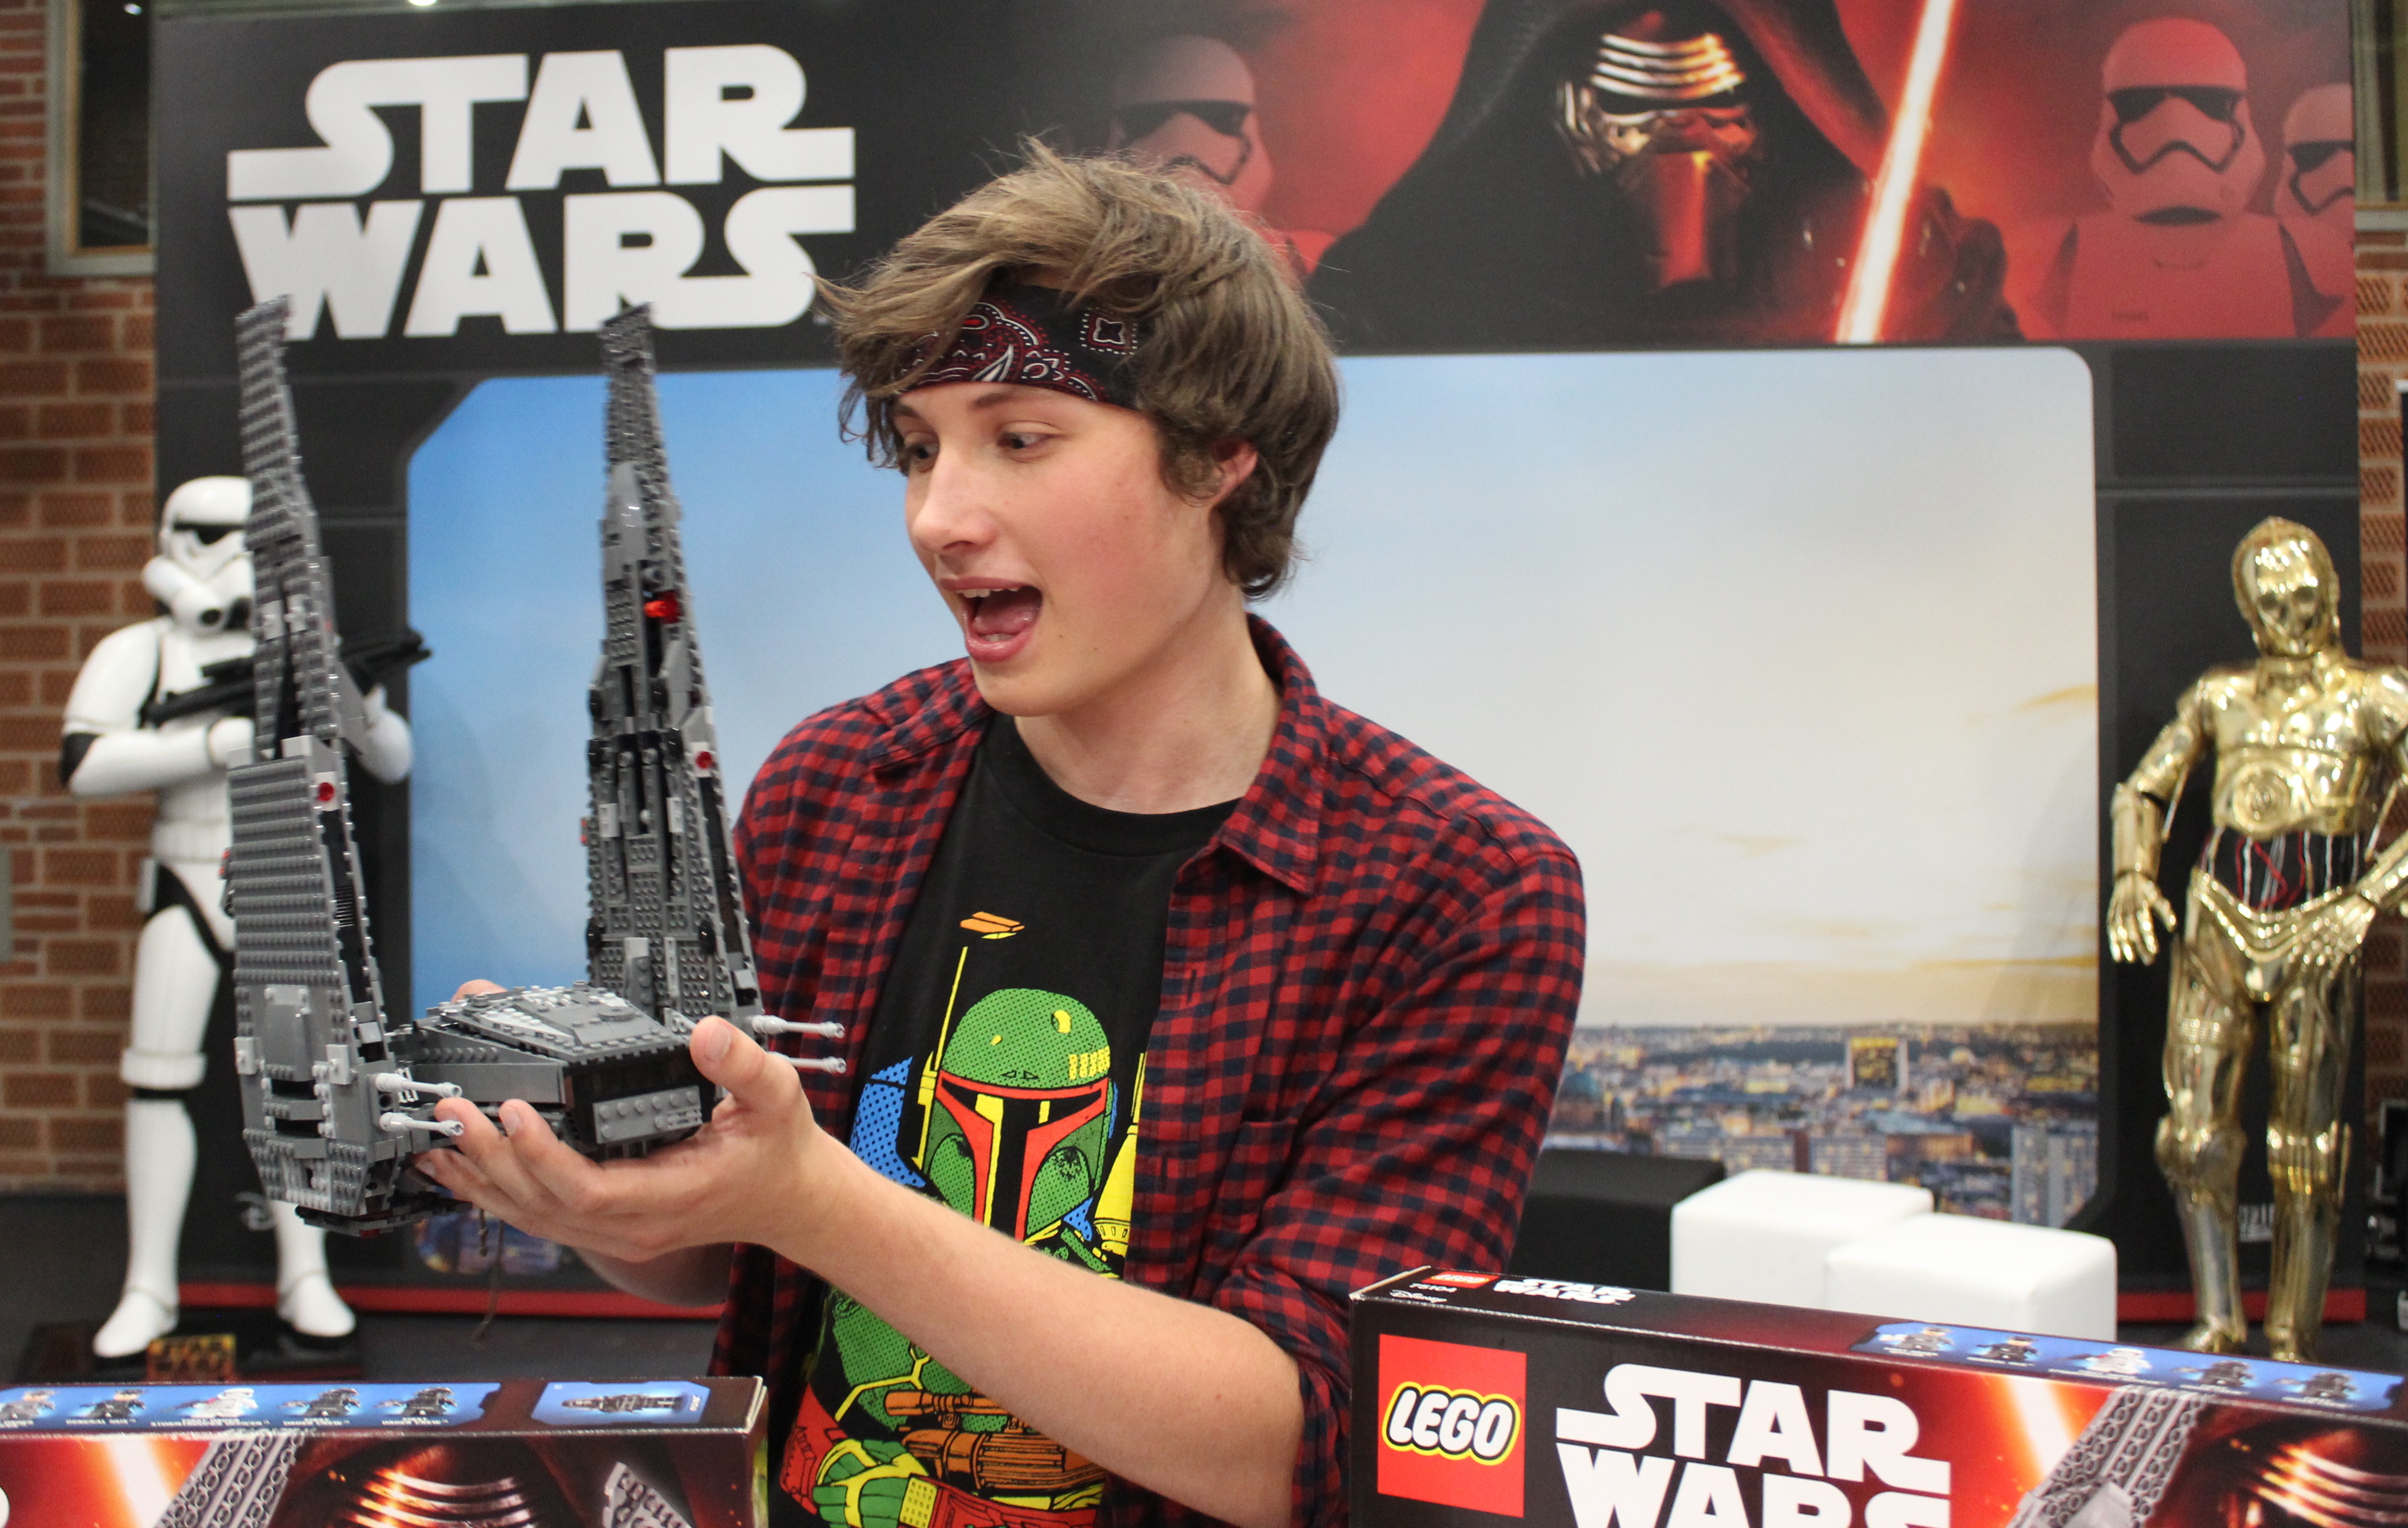 Reyst, a digital star from the Maker Studios network, unboxed LEGO Star Wars Kylo Ren’s Command Shuttle in Berlin, Germany on 3 September 2015 as part of the epic global event marking the countdown to ‘Force Friday’ when merchandise from the highly anticipated new movie goes on sale. Fans can tune in to watch live unboxing events, which unfolds over 18 hours, in 15 different cities and 12 countries on the YouTube Star Wars channel. Retailers around the the globe will open their doors at midnight on 9/4 and fans can document their experiences using #ForceFriday.